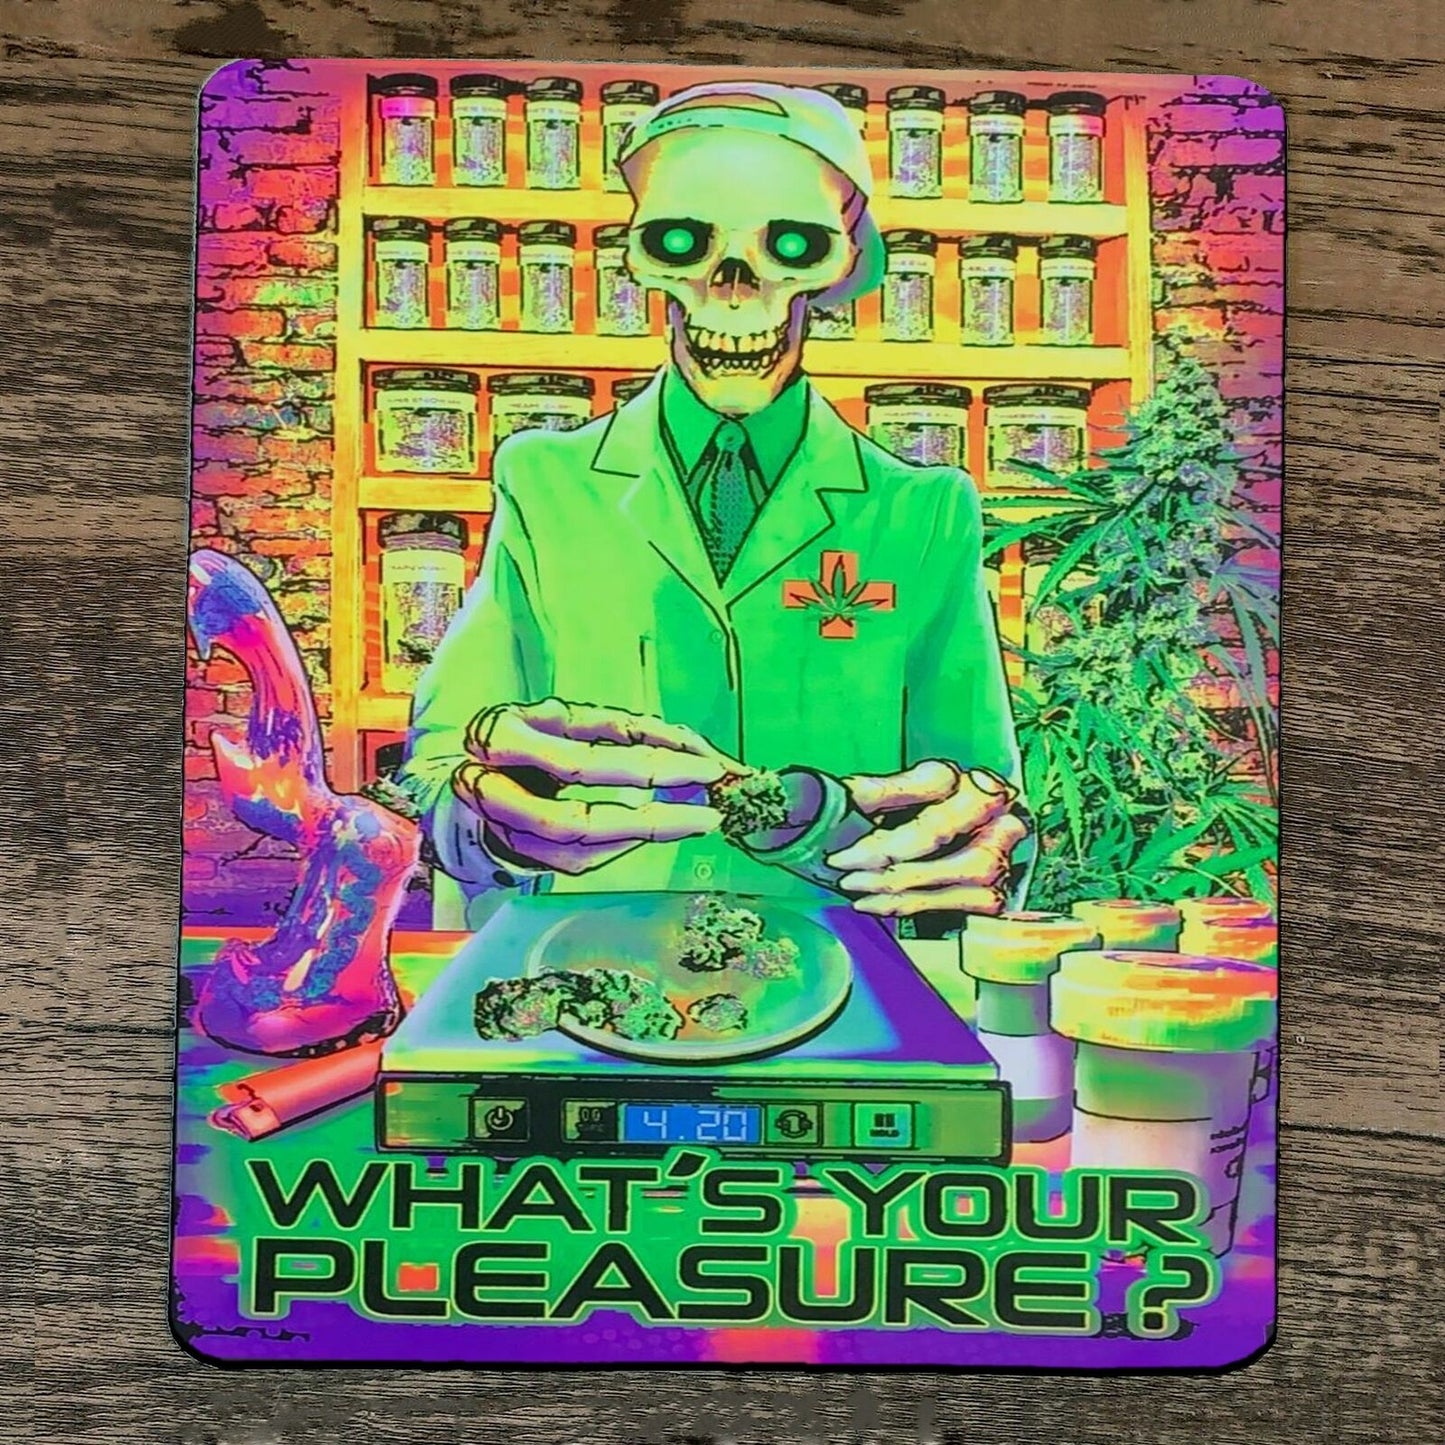 Mouse Pad Whats Your Pleasure Weed 420 Doctor